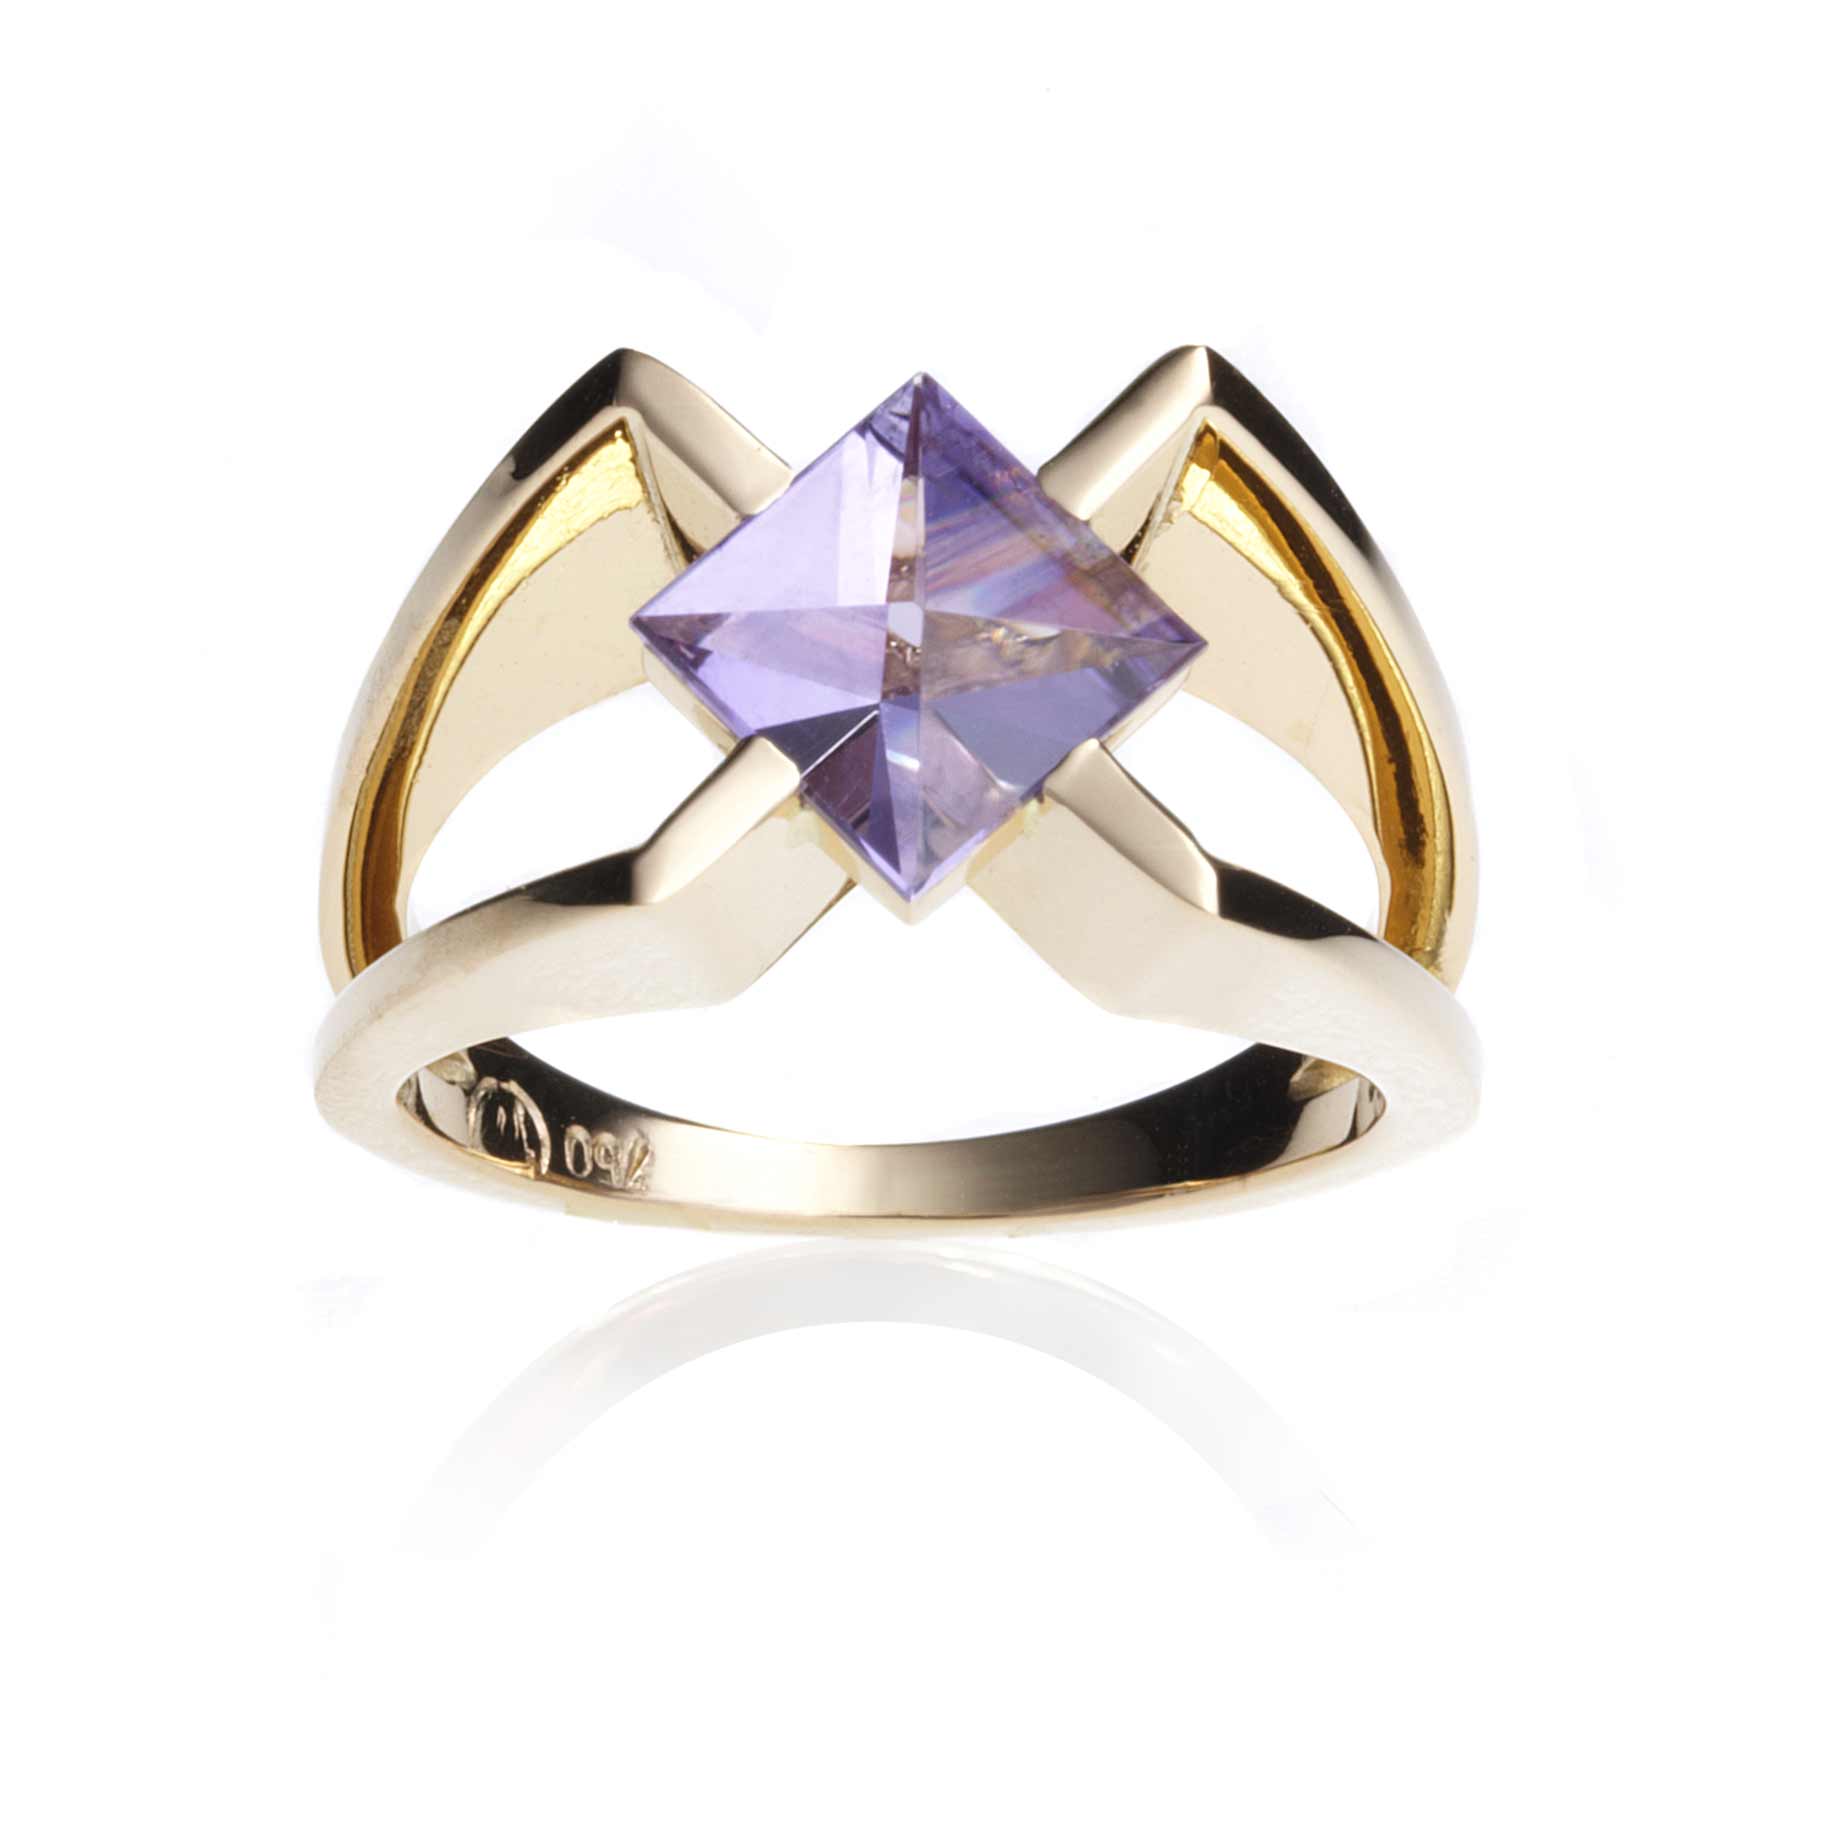 An 18 carat golden ring in a colour shade between yellow and rose gold. This ring encloses a gemstone, an amethyst, cut in Context cut.